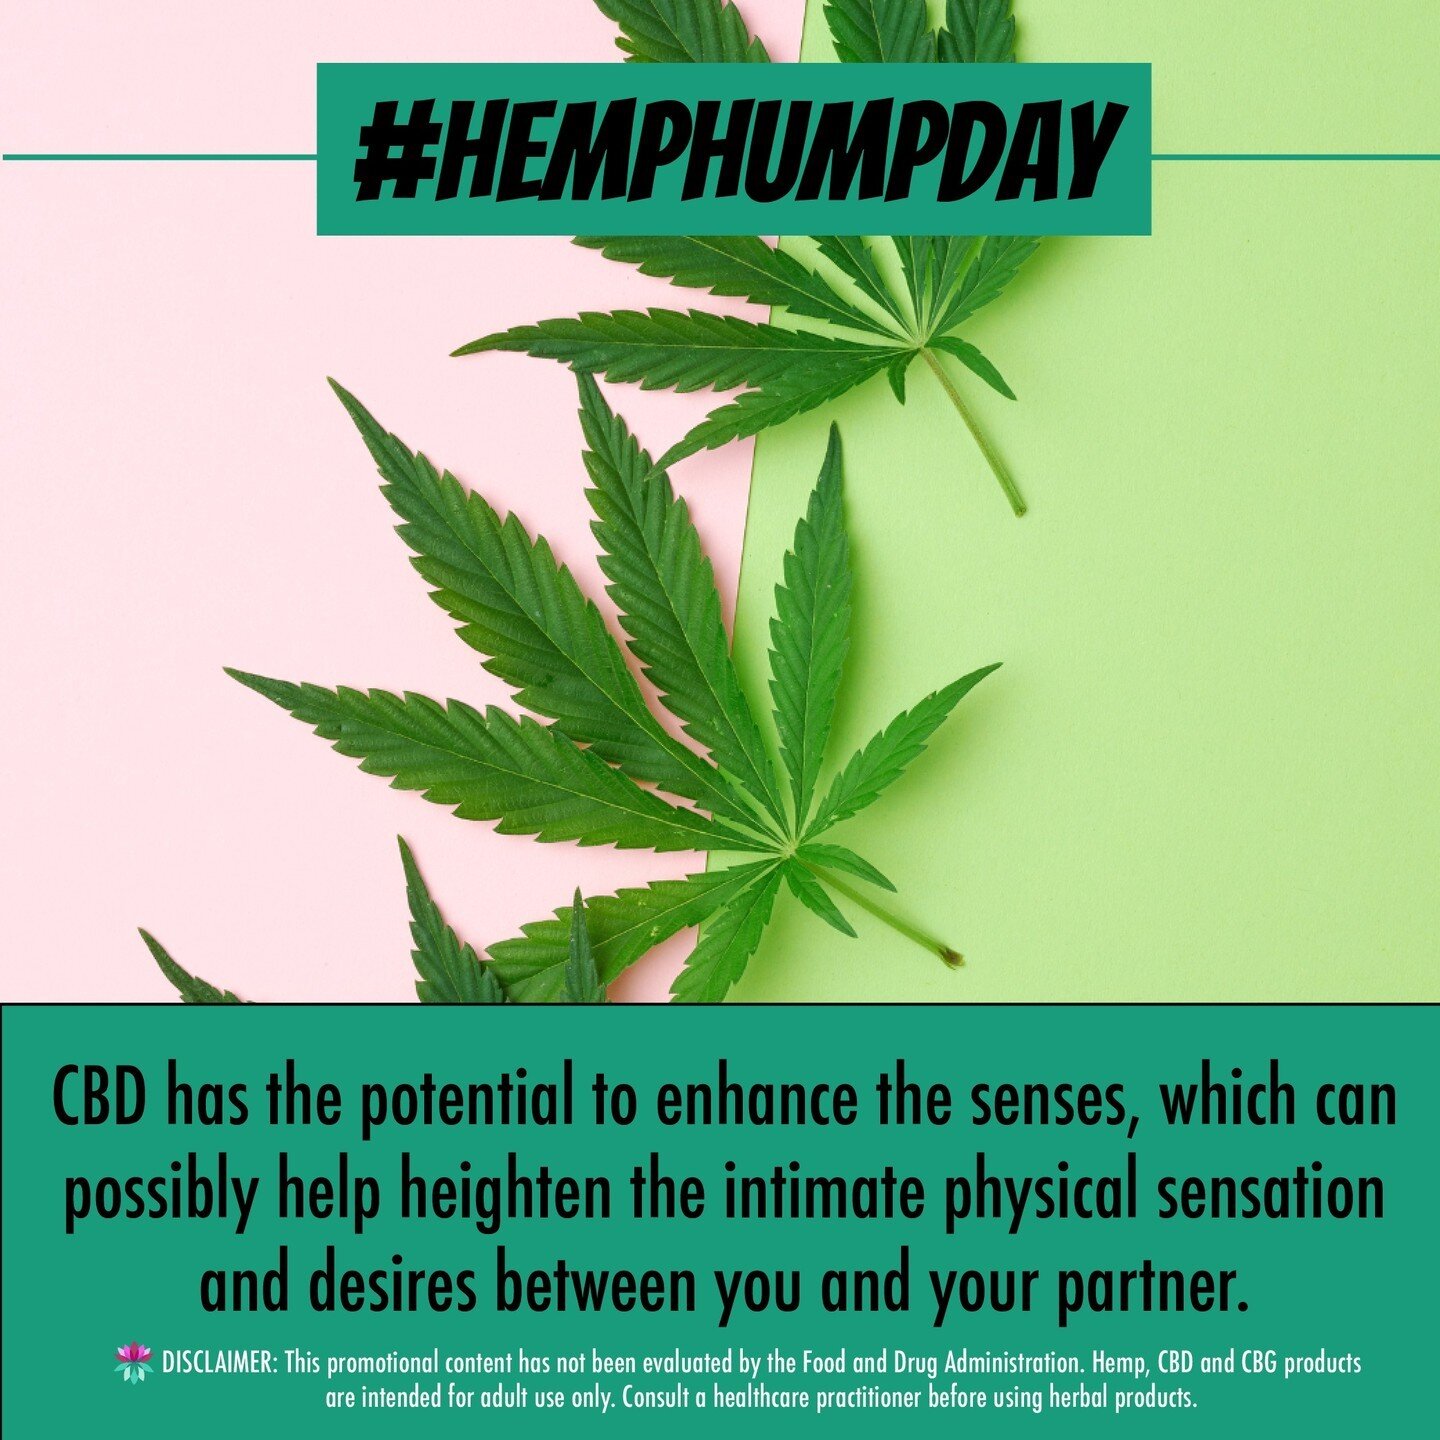 Want to spice things up with that special someone? CBD can potentially enhance the senses, which could heighten the physical sensation between you and your partner. #HempHumpDay